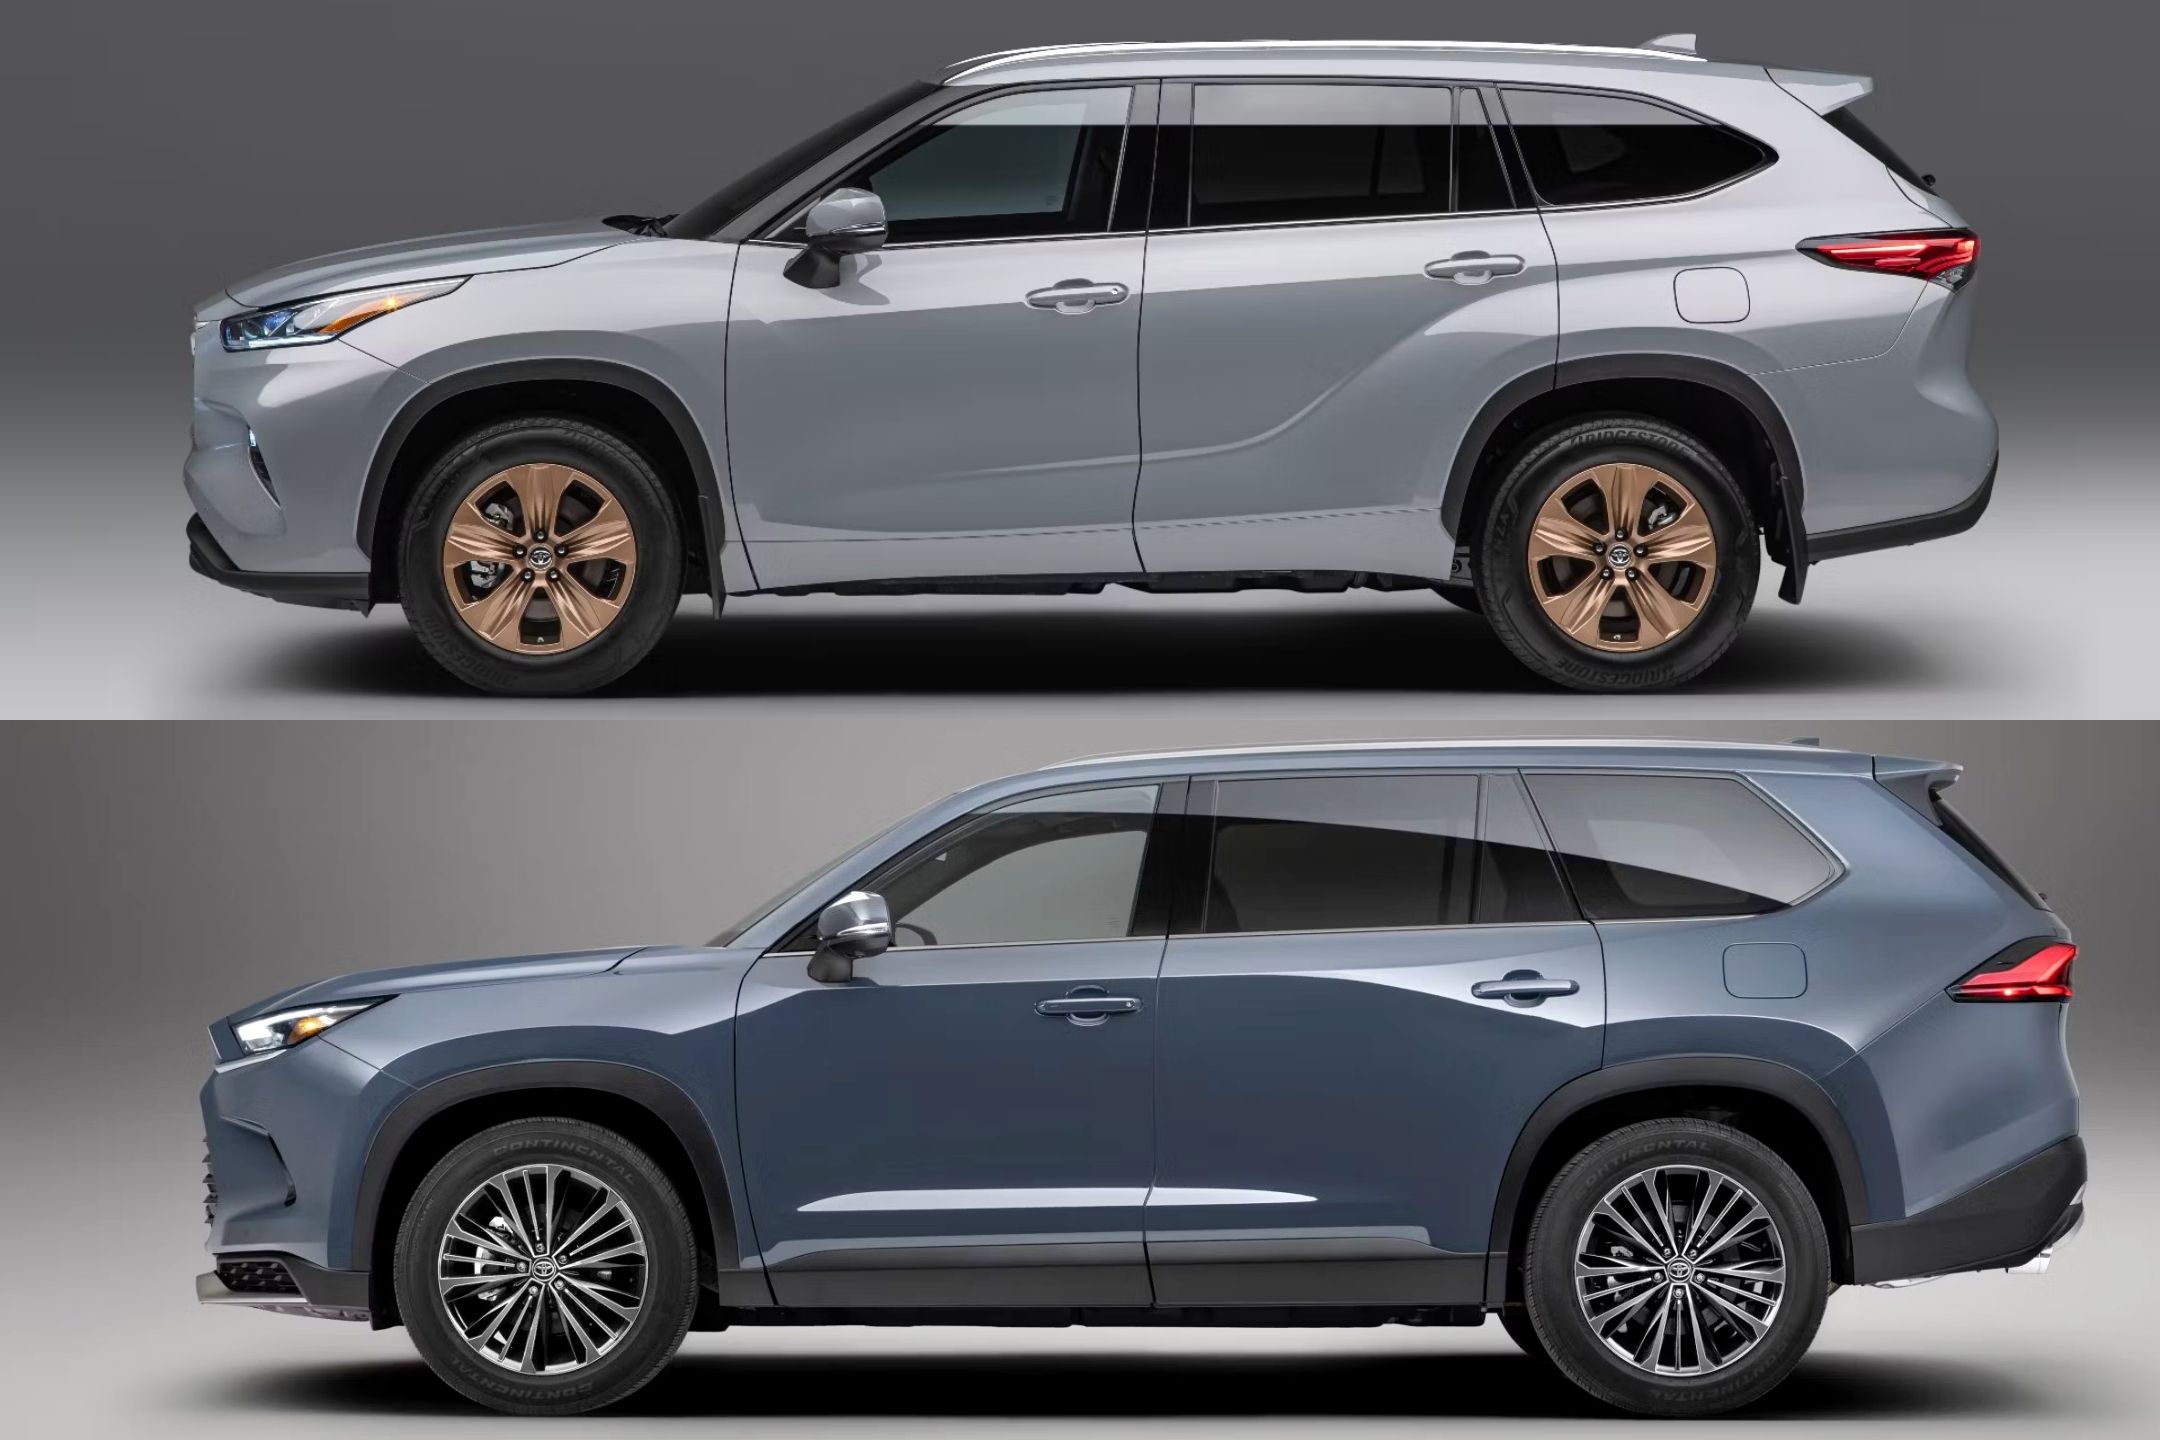 The Real Difference Between The Toyota Highlander And Grand Highlander